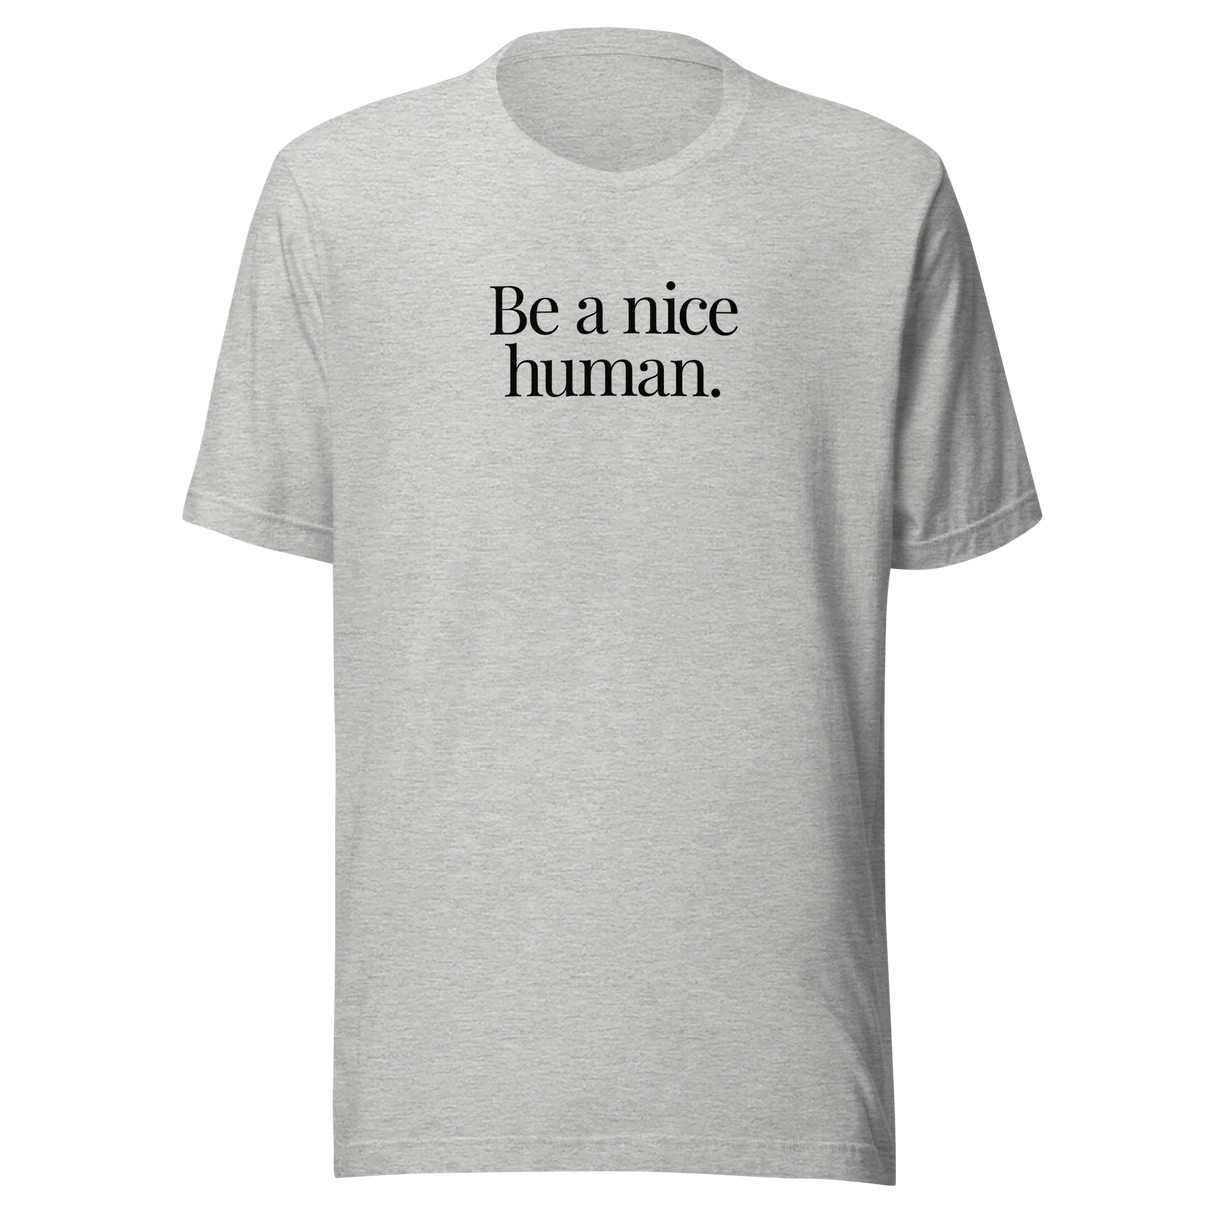 be-a-nice-human-be-a-nice-human-tee-be-kind-t-shirt-kindness-tee-society-t-shirt-inspirational-tee#color_athletic-heather